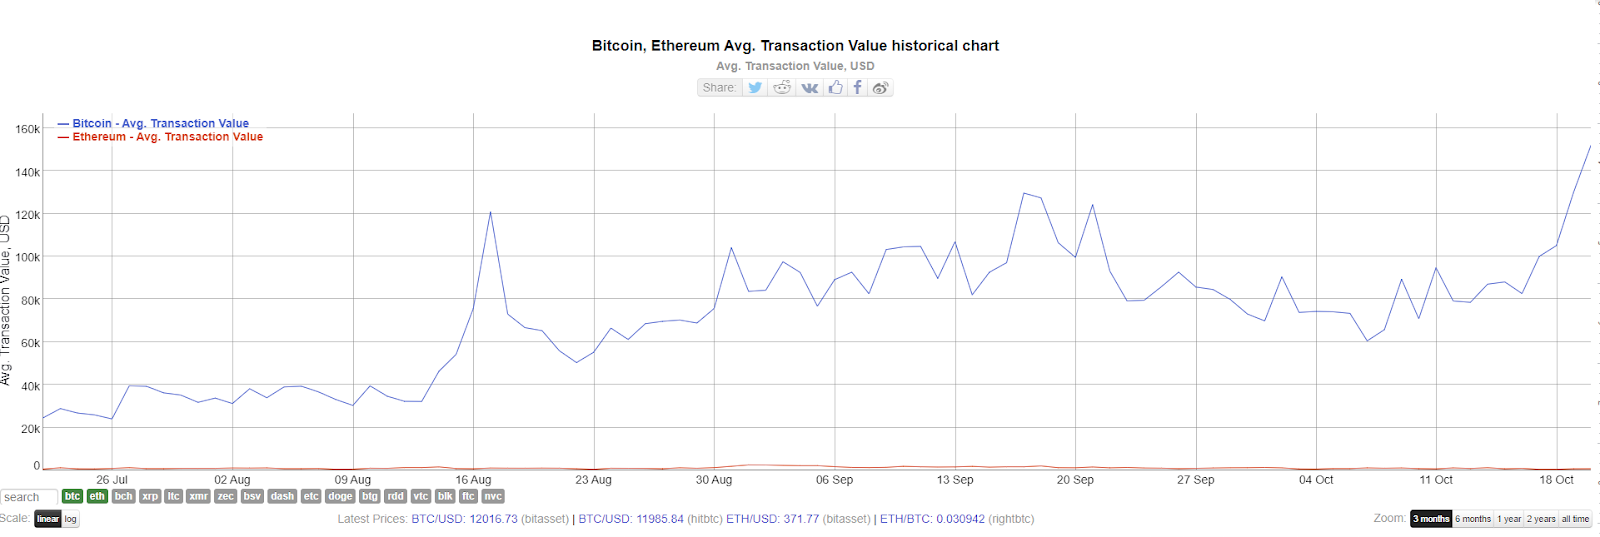 The average cost of Bitcoin transactions has grown 6 times since July